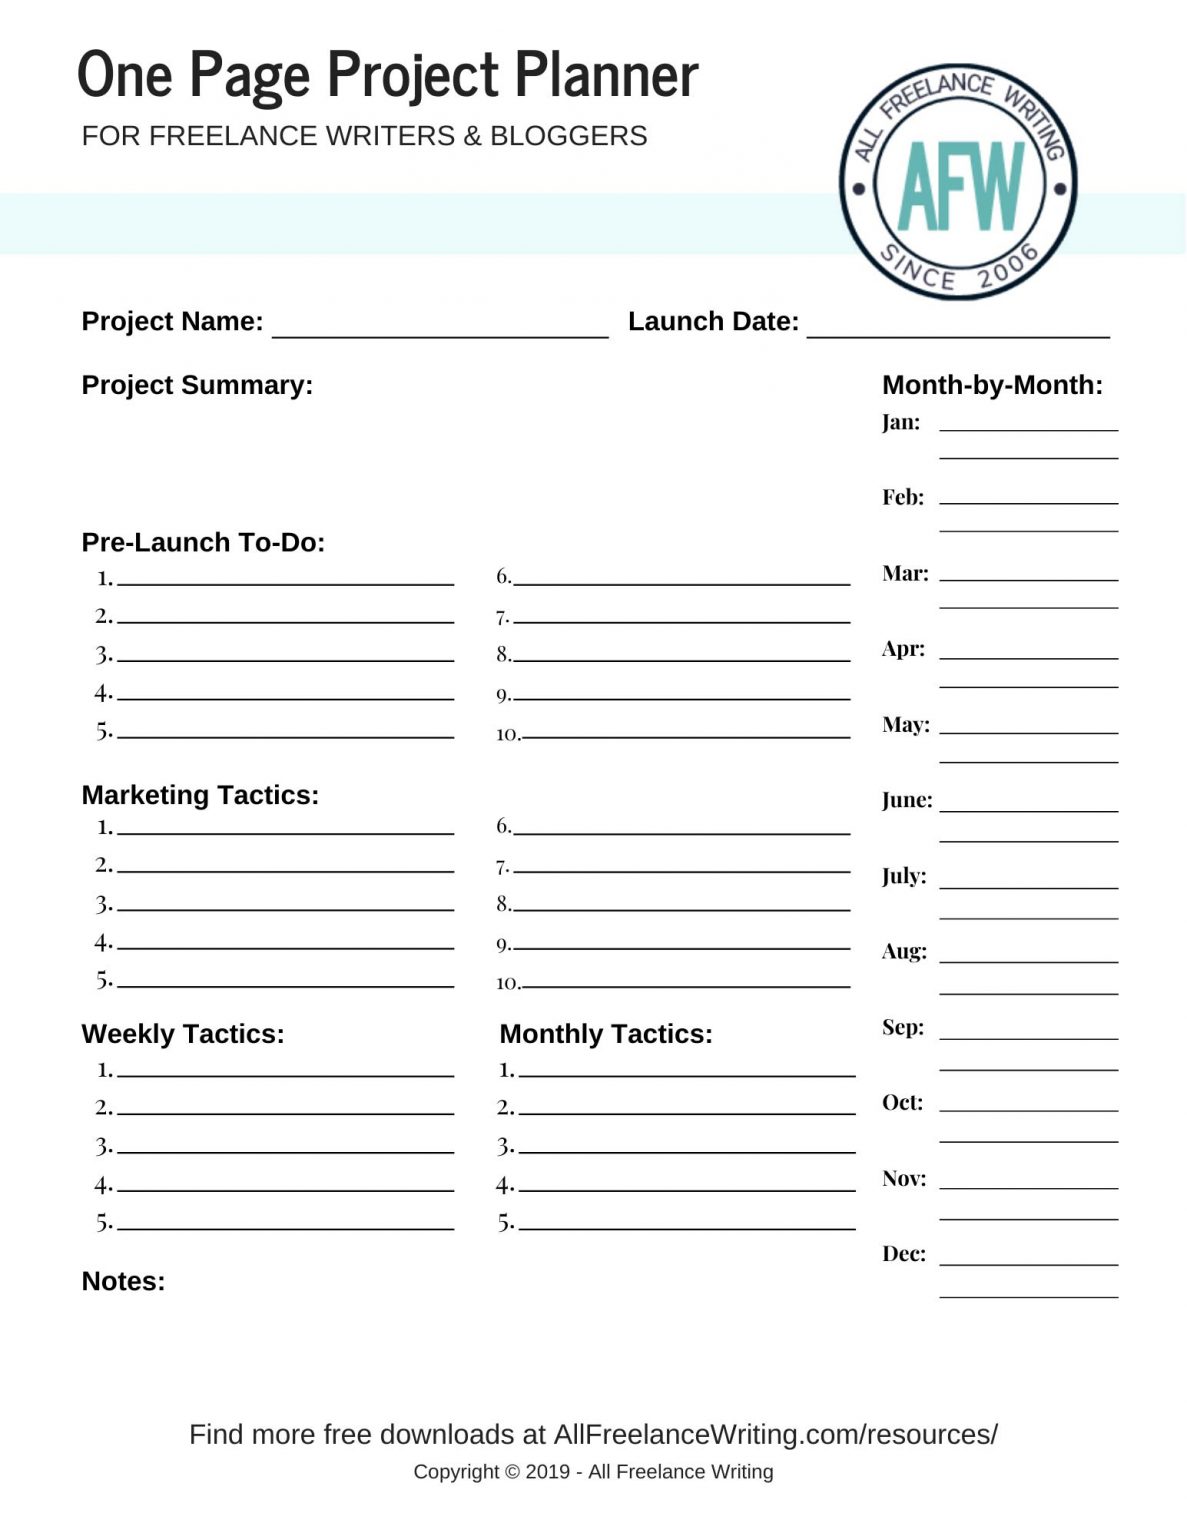 Image of a downloadable one-page project planner worksheet for freelance writers and bloggers including a pre-launch to-do list, marketing tactics, and scheduled weekly, monthly, and month-to-month planning